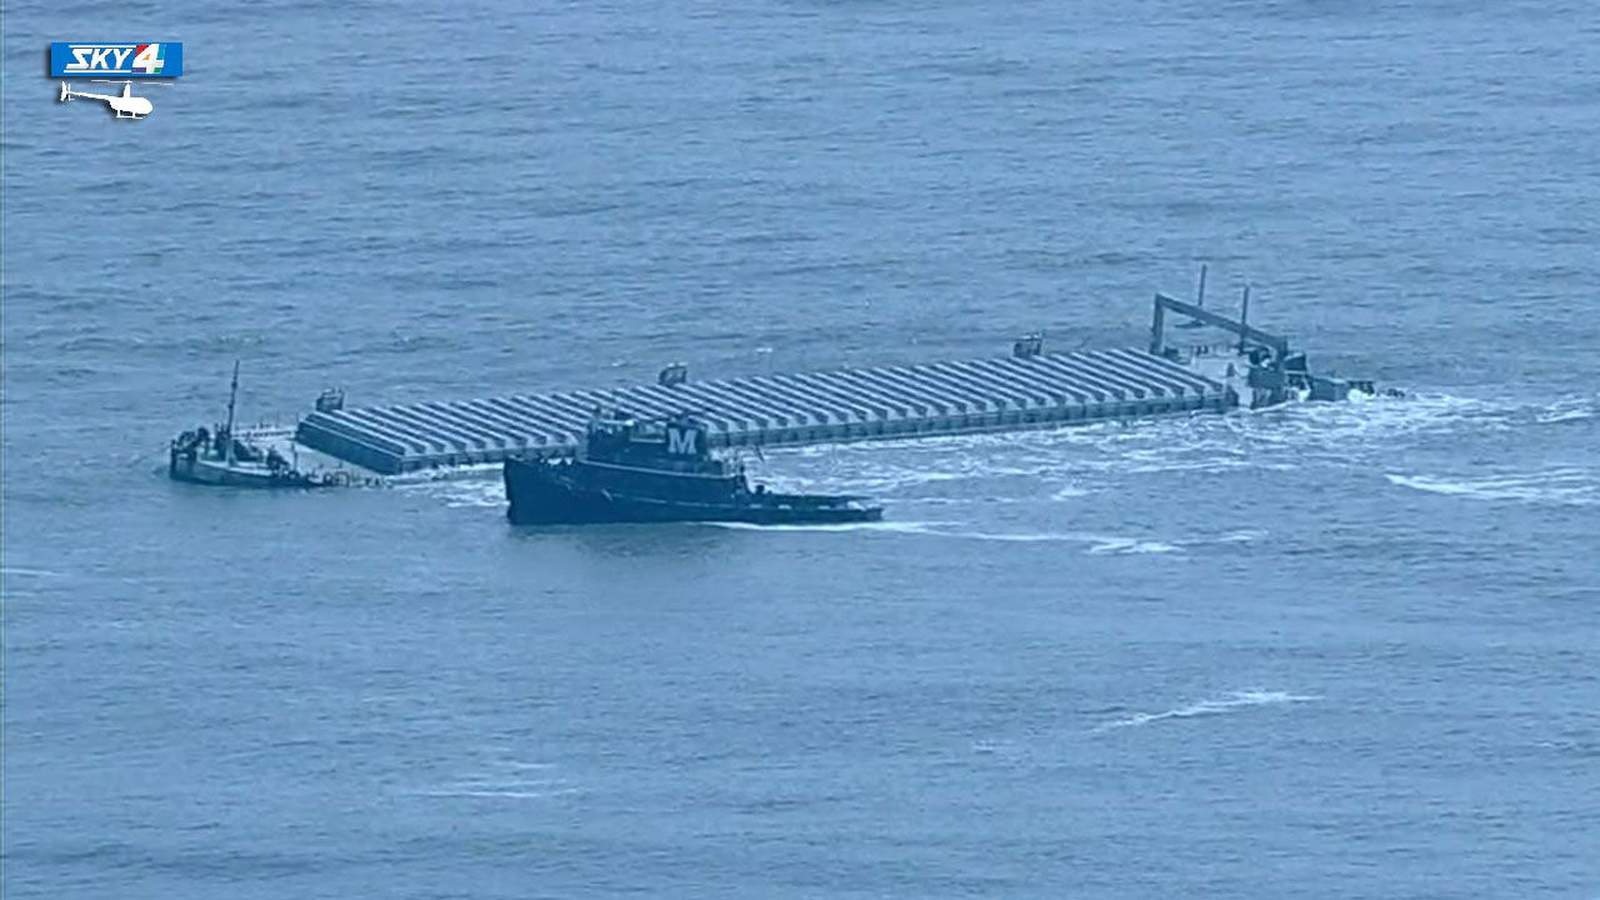 Massive barge still stranded offshore, south of the St. Johns River